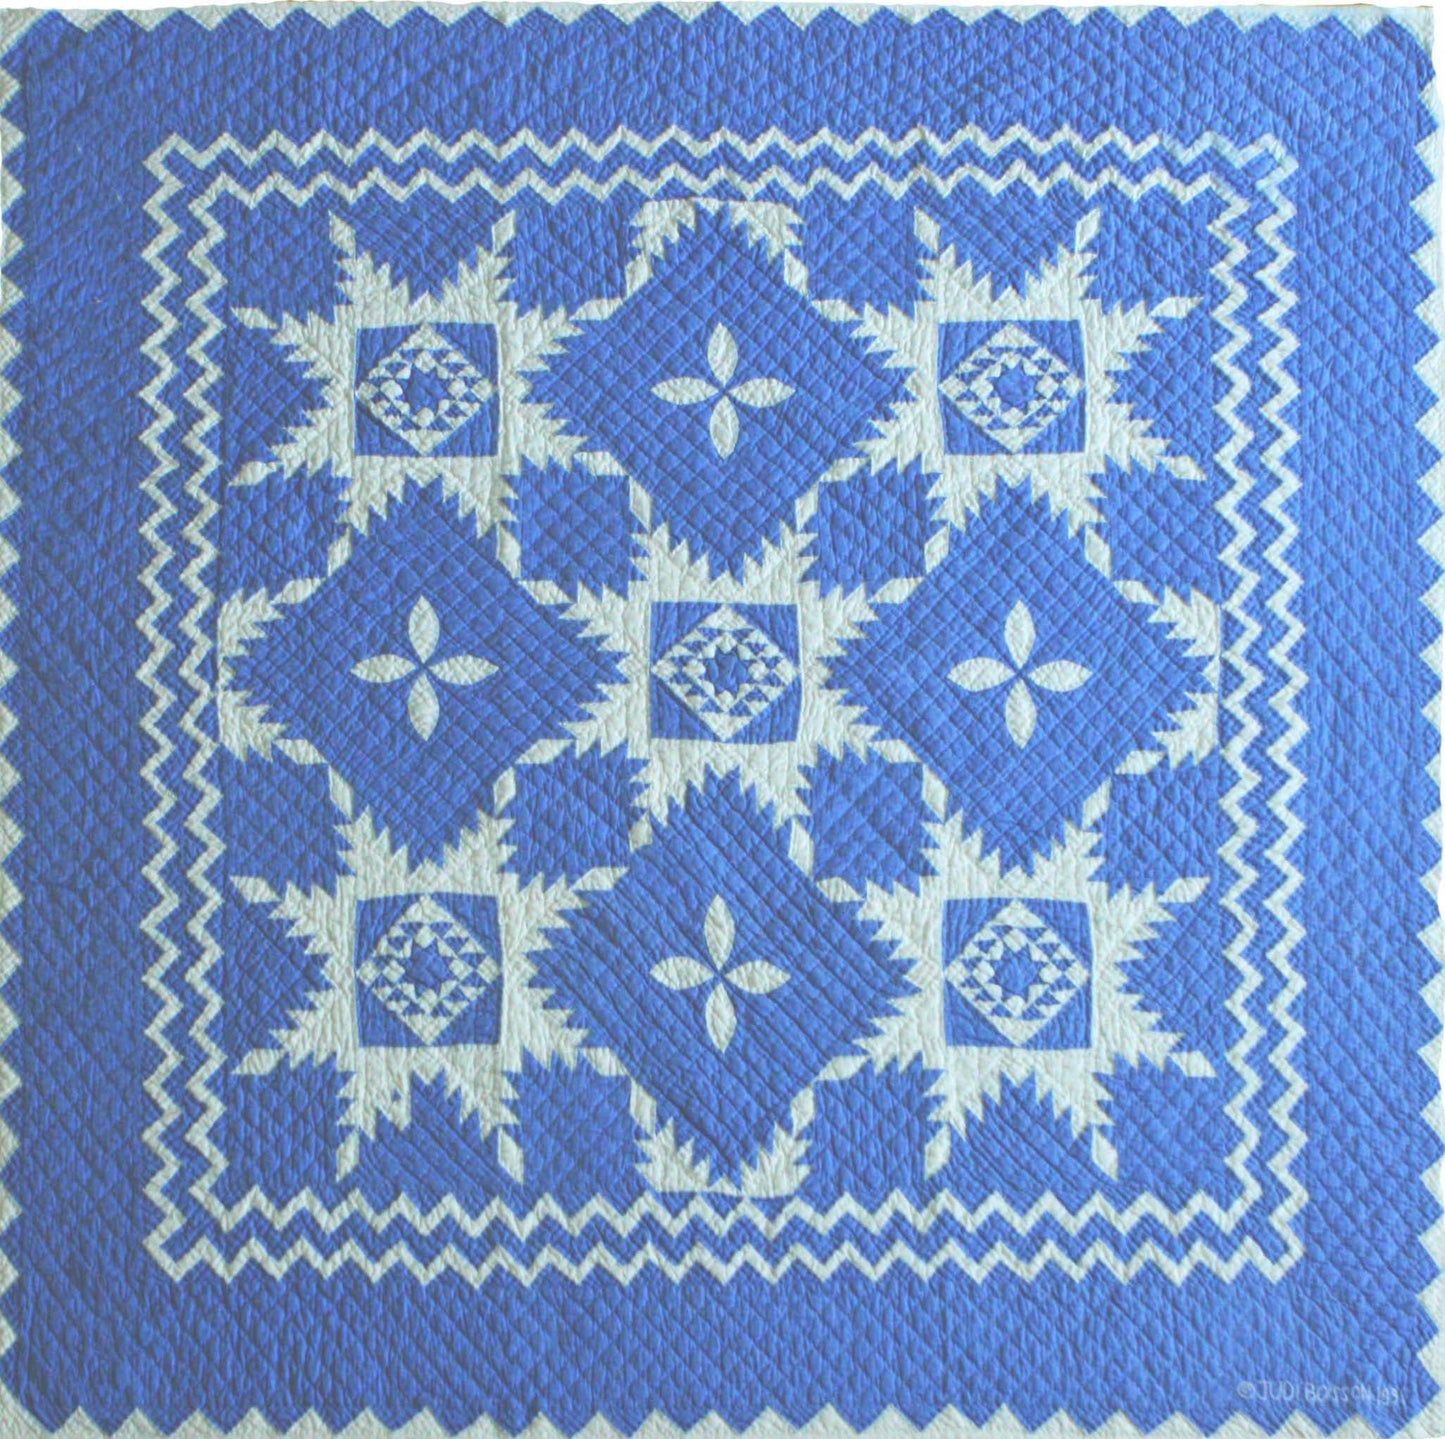 "Feathered Star" in Cornflower-White Cover-Up Quilt 54" x 54"